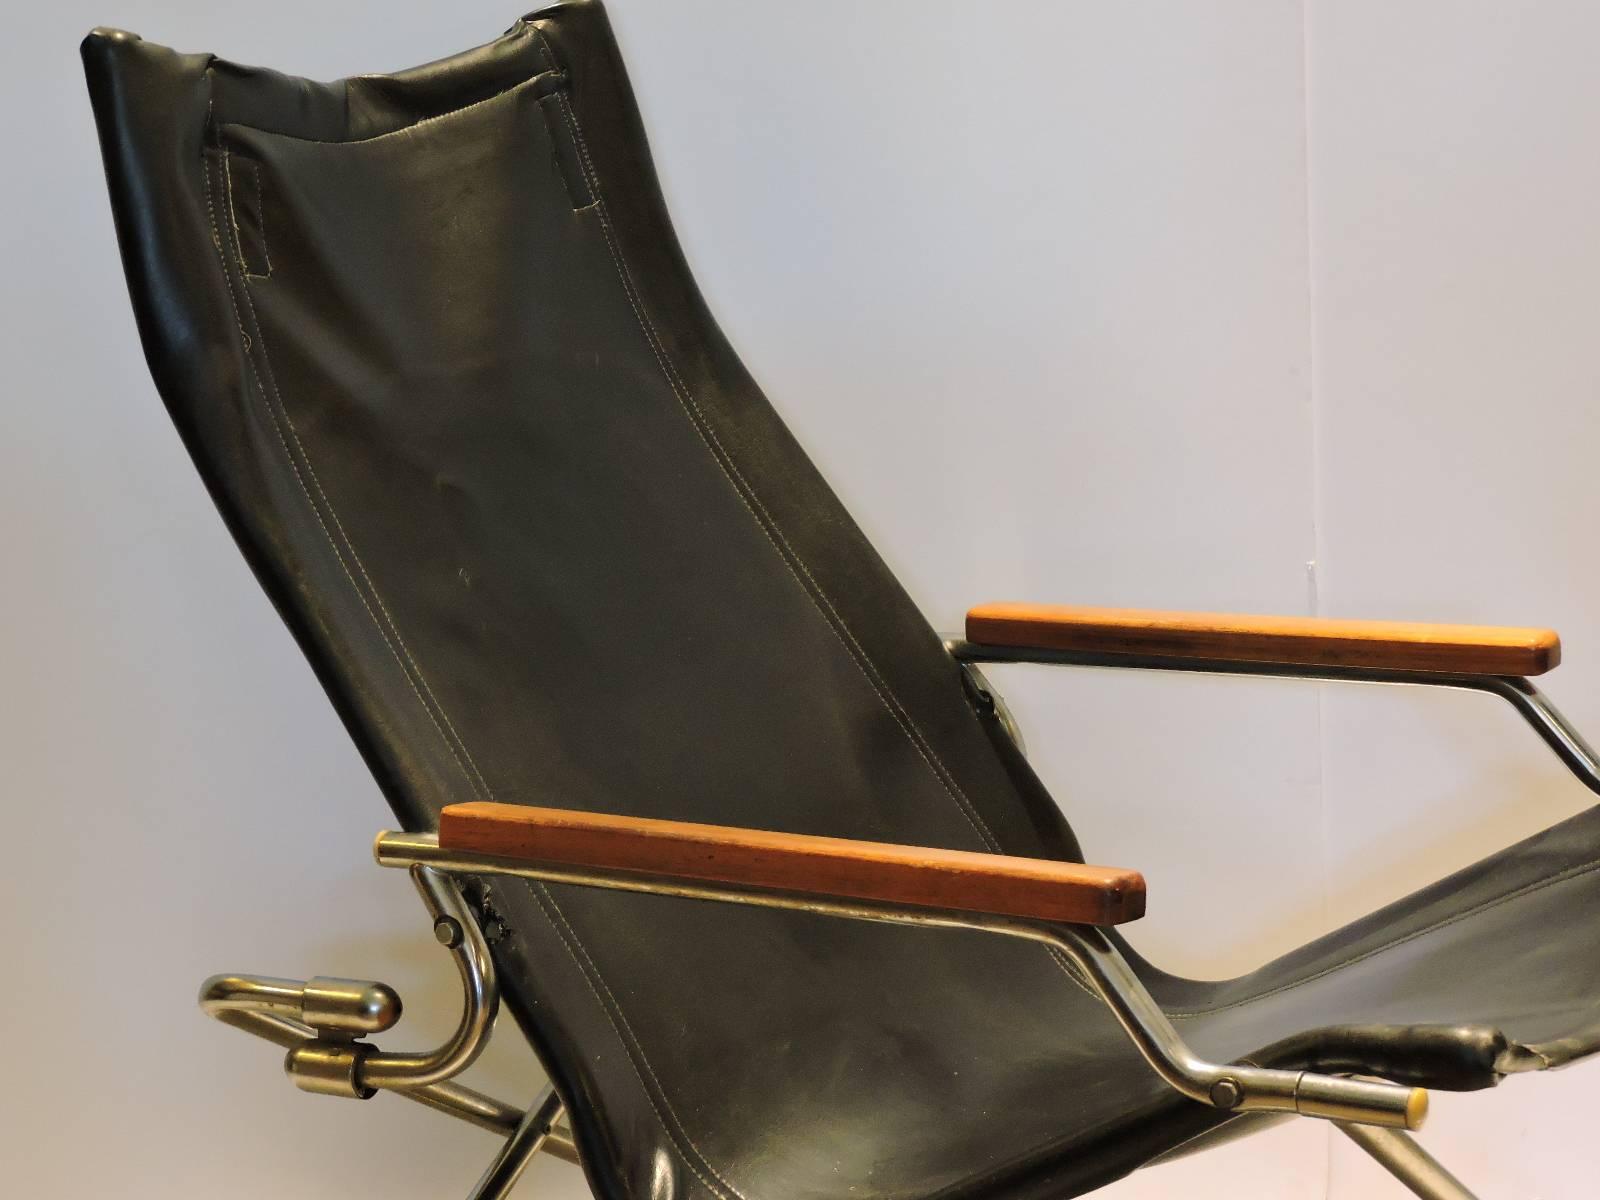 Folding 1970s modernist sling chair having a chrome-plated steel framework with wood arm rests and the original black faux leather vinyl upholstery. Manufactured by Uchida, Japan. Similar in design to the Takeshi NII NY folding chair also by Uchida.